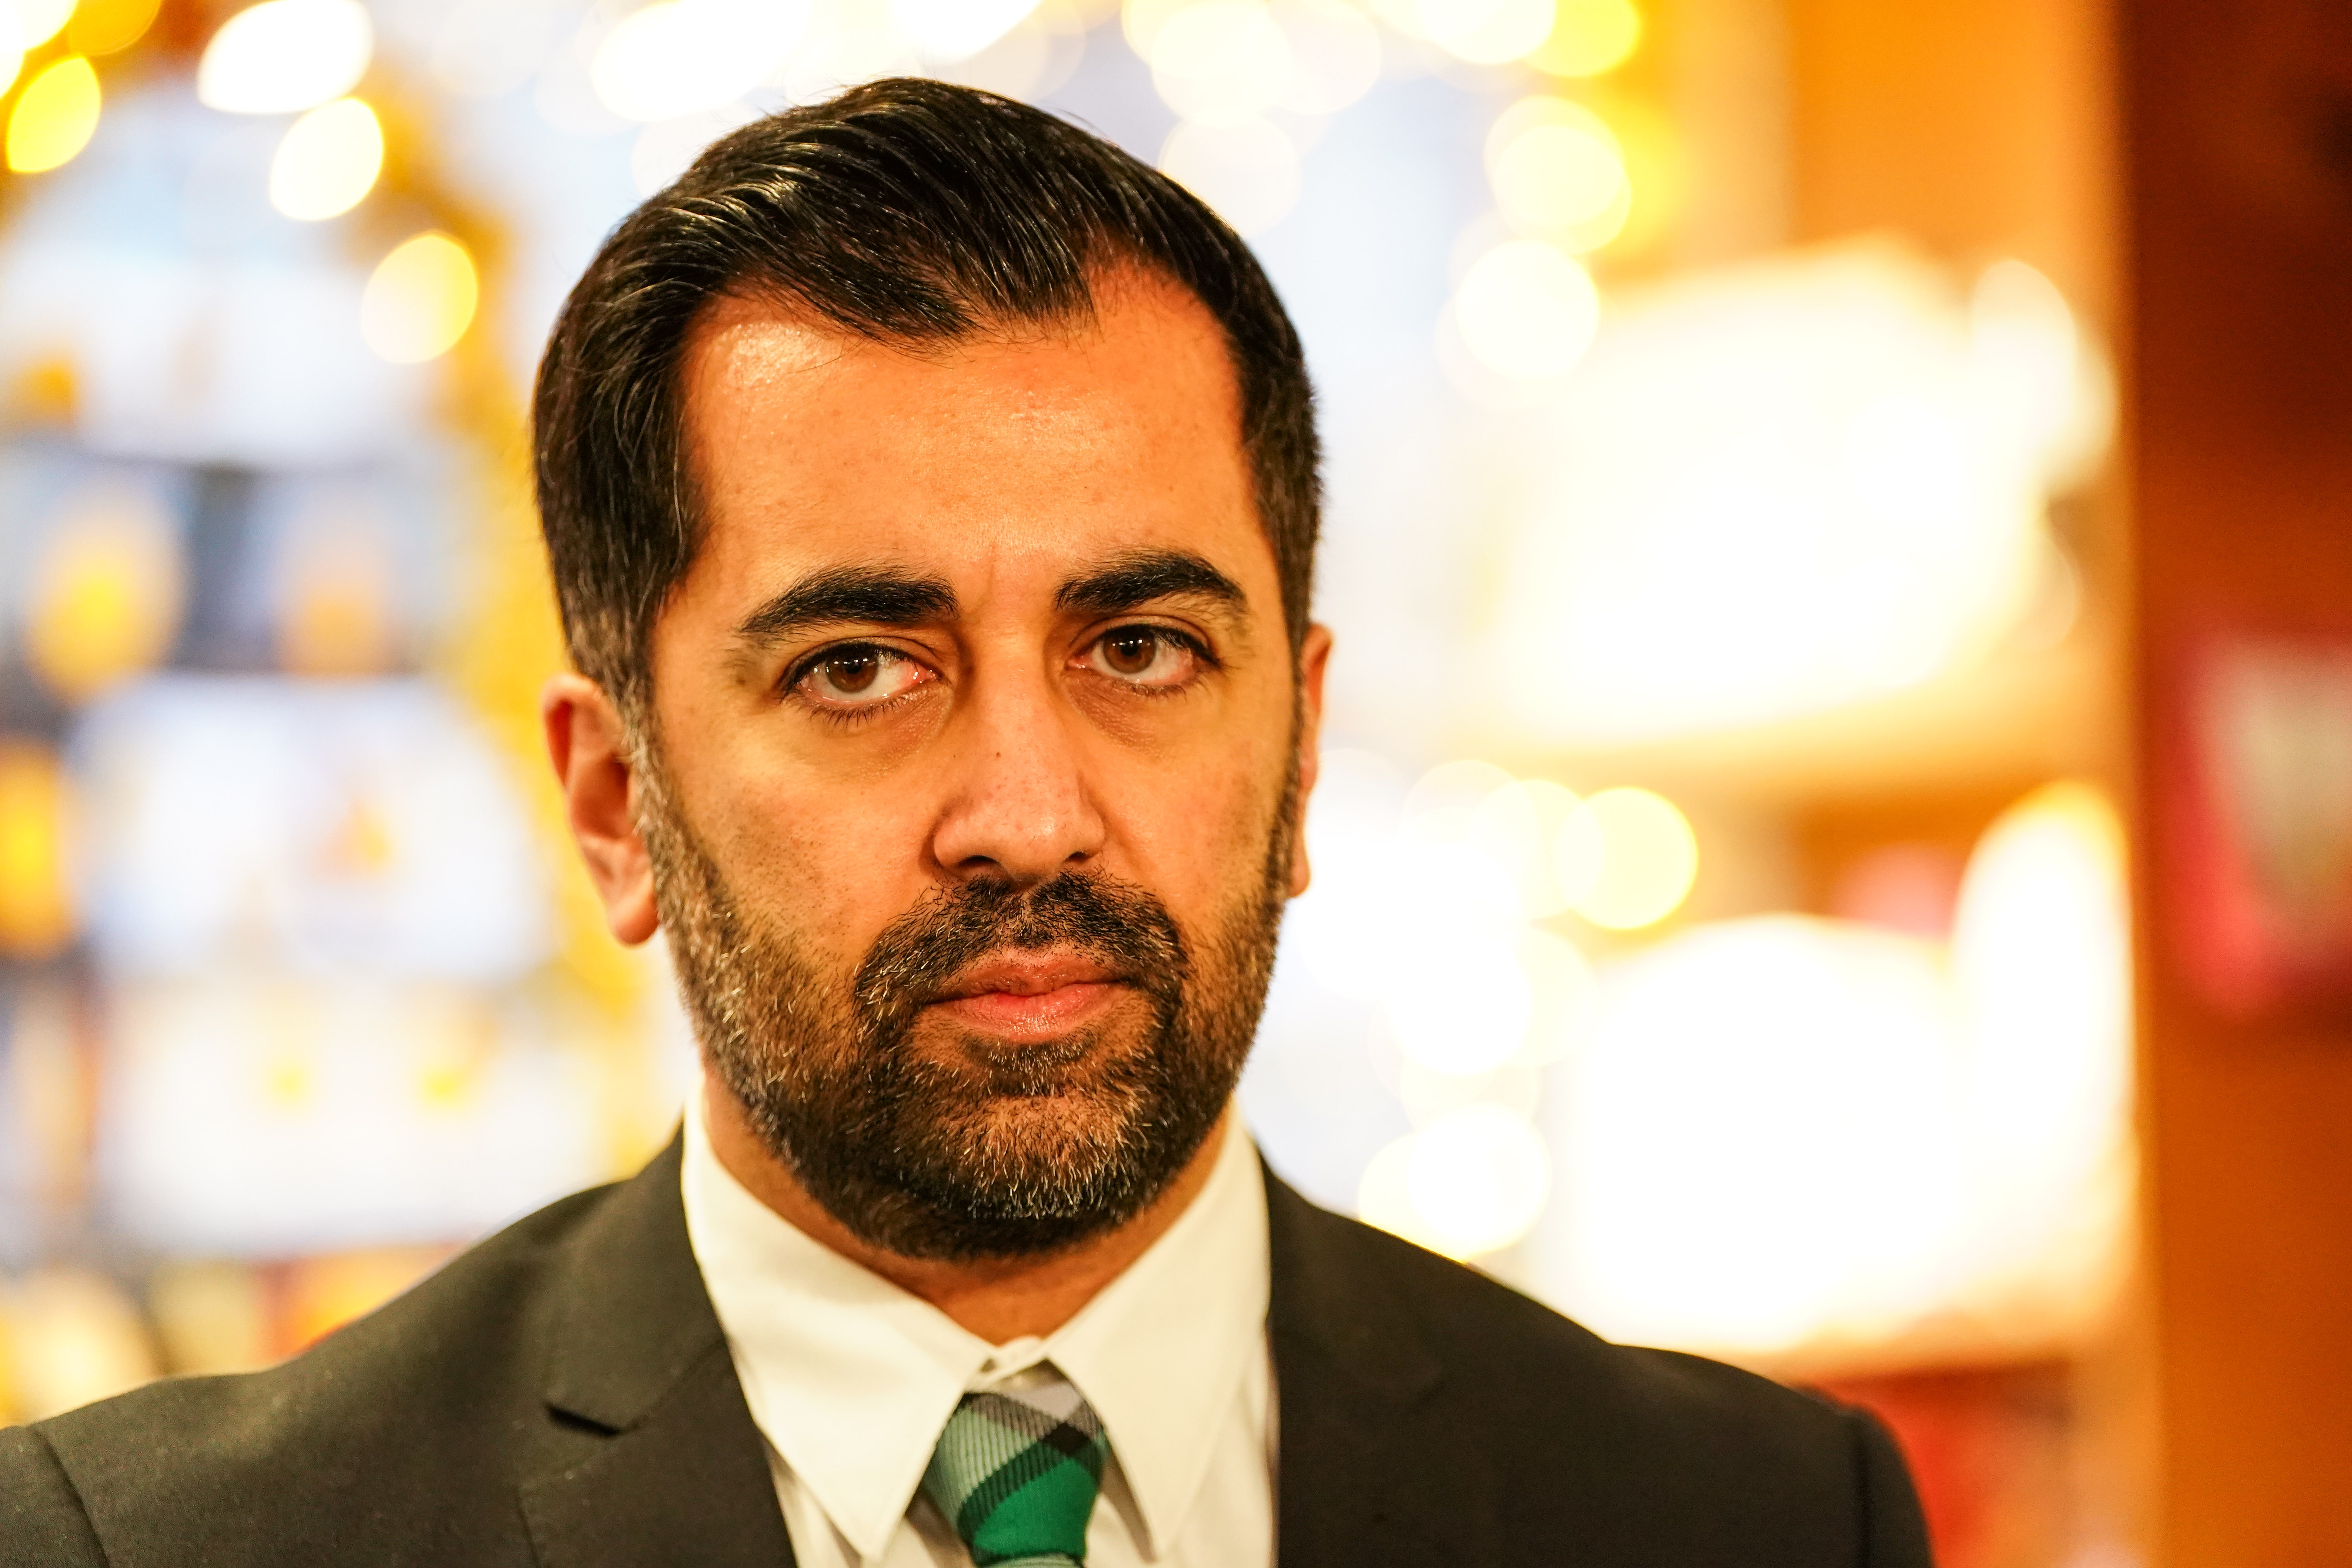 Humza Yousaf's party faced a number of problems when he became leader.